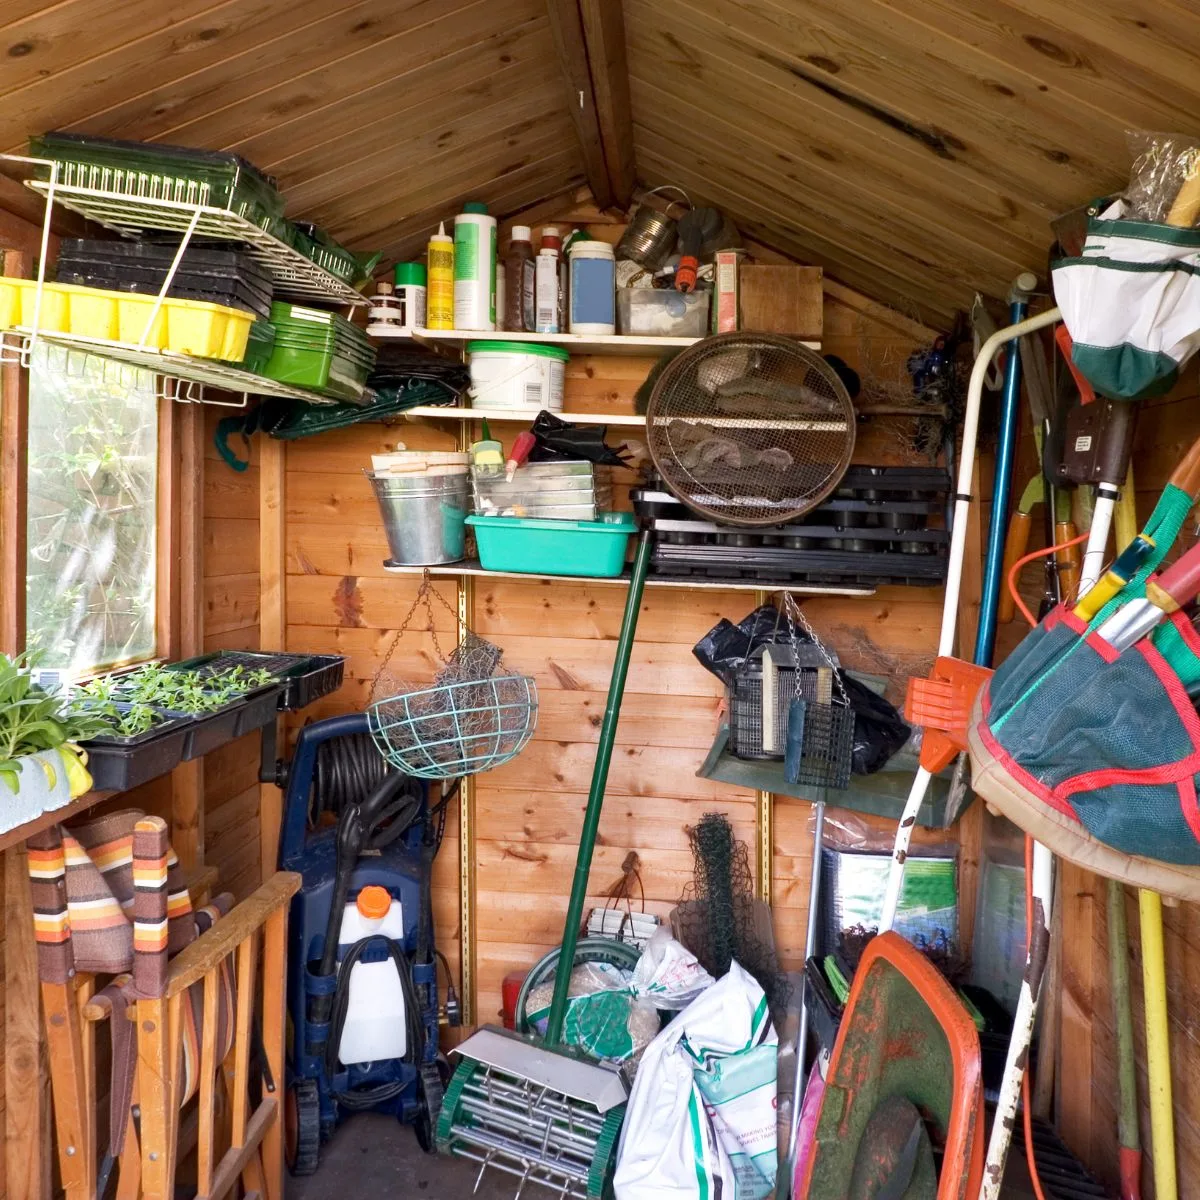 A cluttered storage shed.